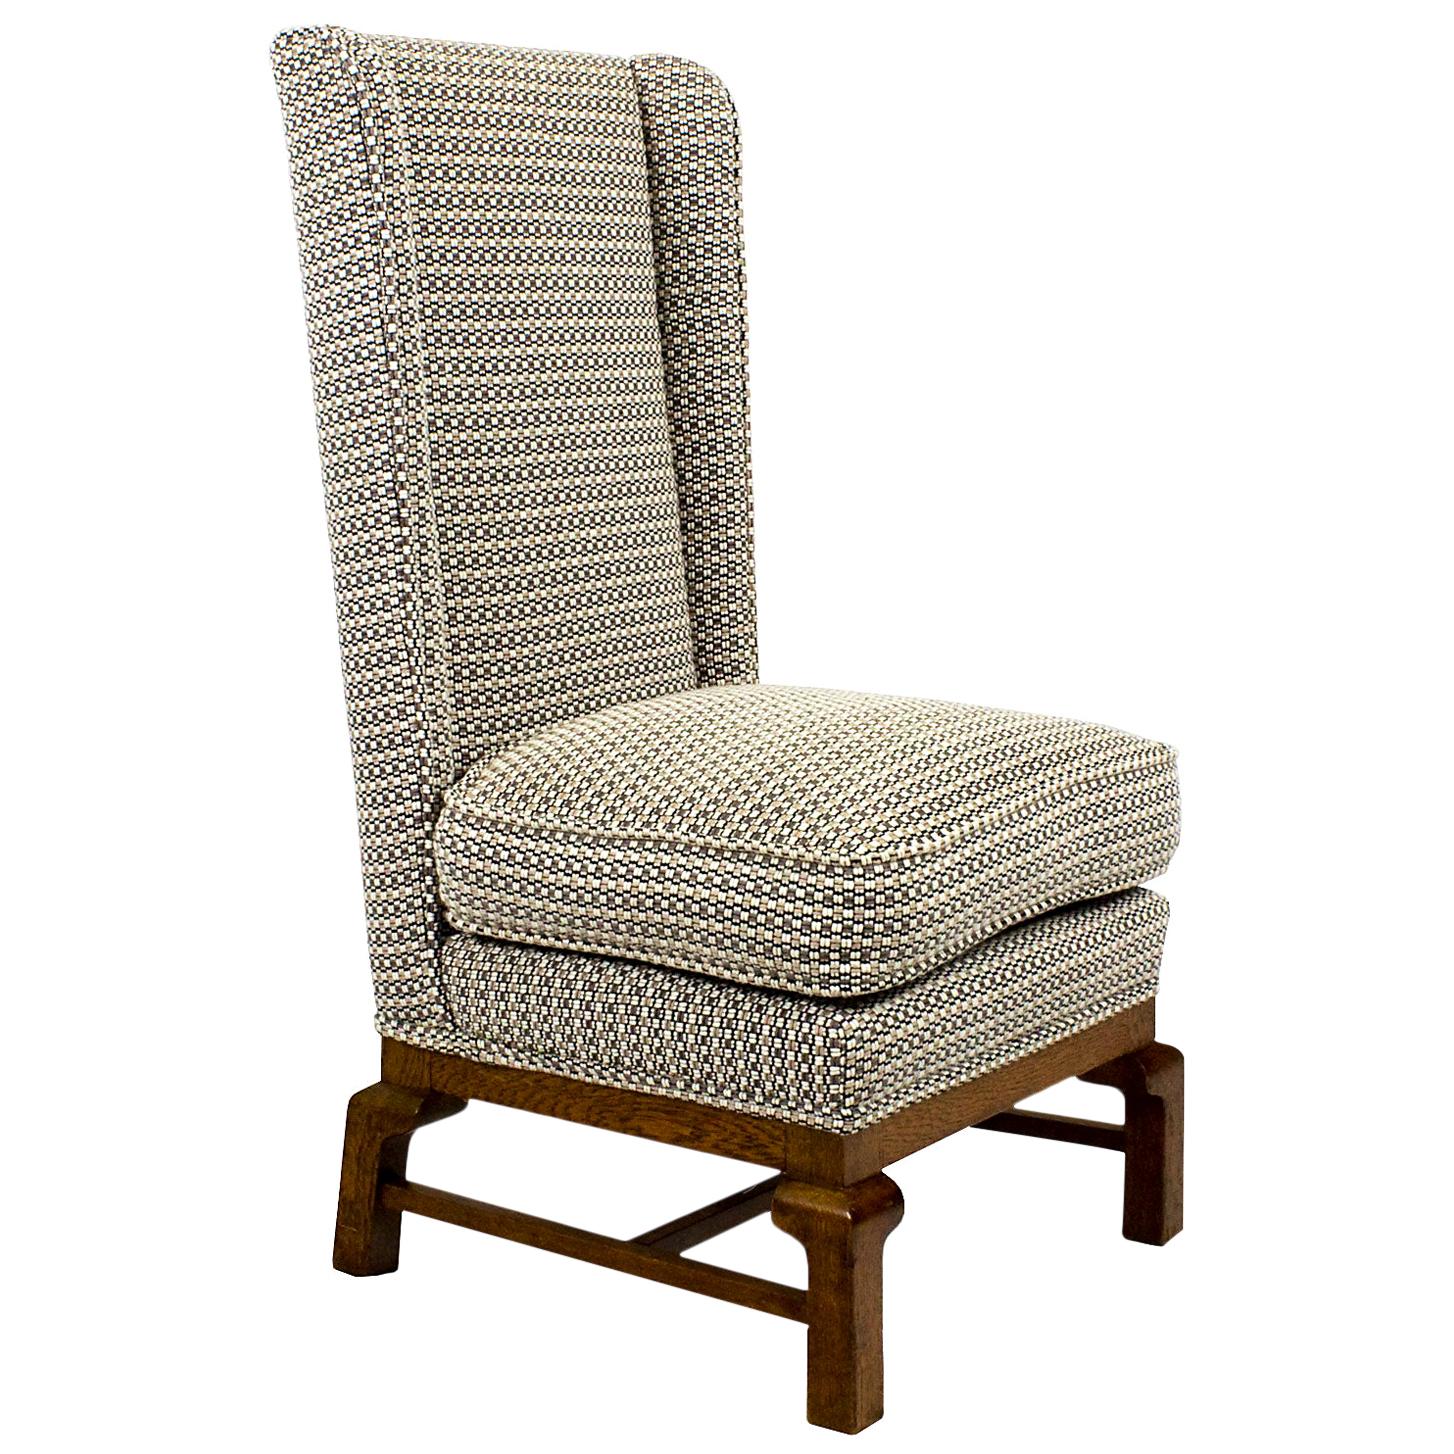 Low Mid-Century Modern Bedroom Chair in Oak and Pierre Frey's Fabric - Barcelona For Sale